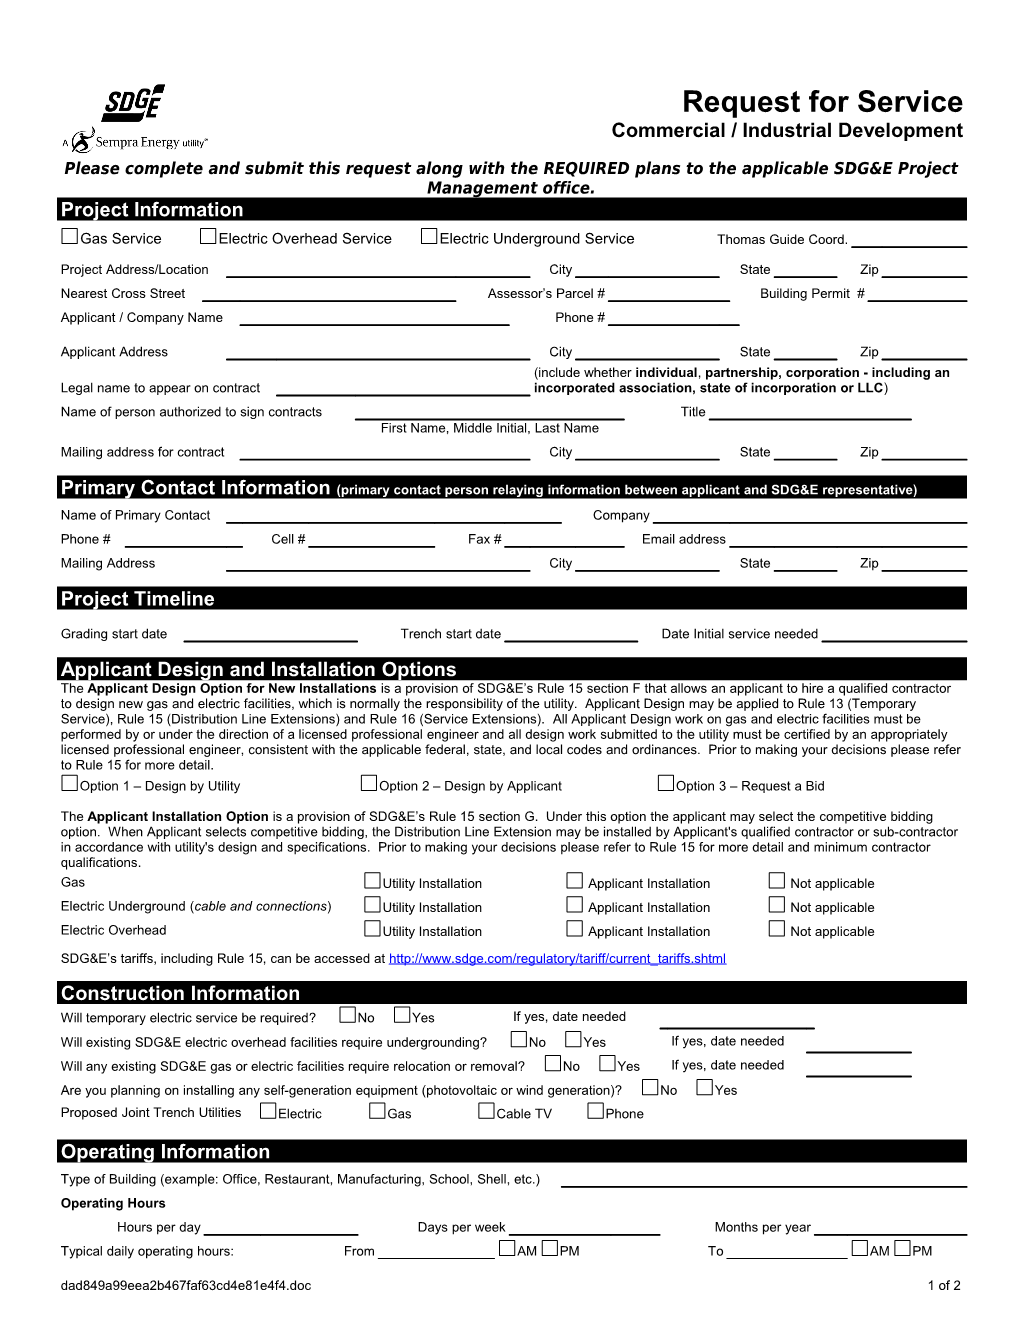 Commercial and Industrial Request for Service Form